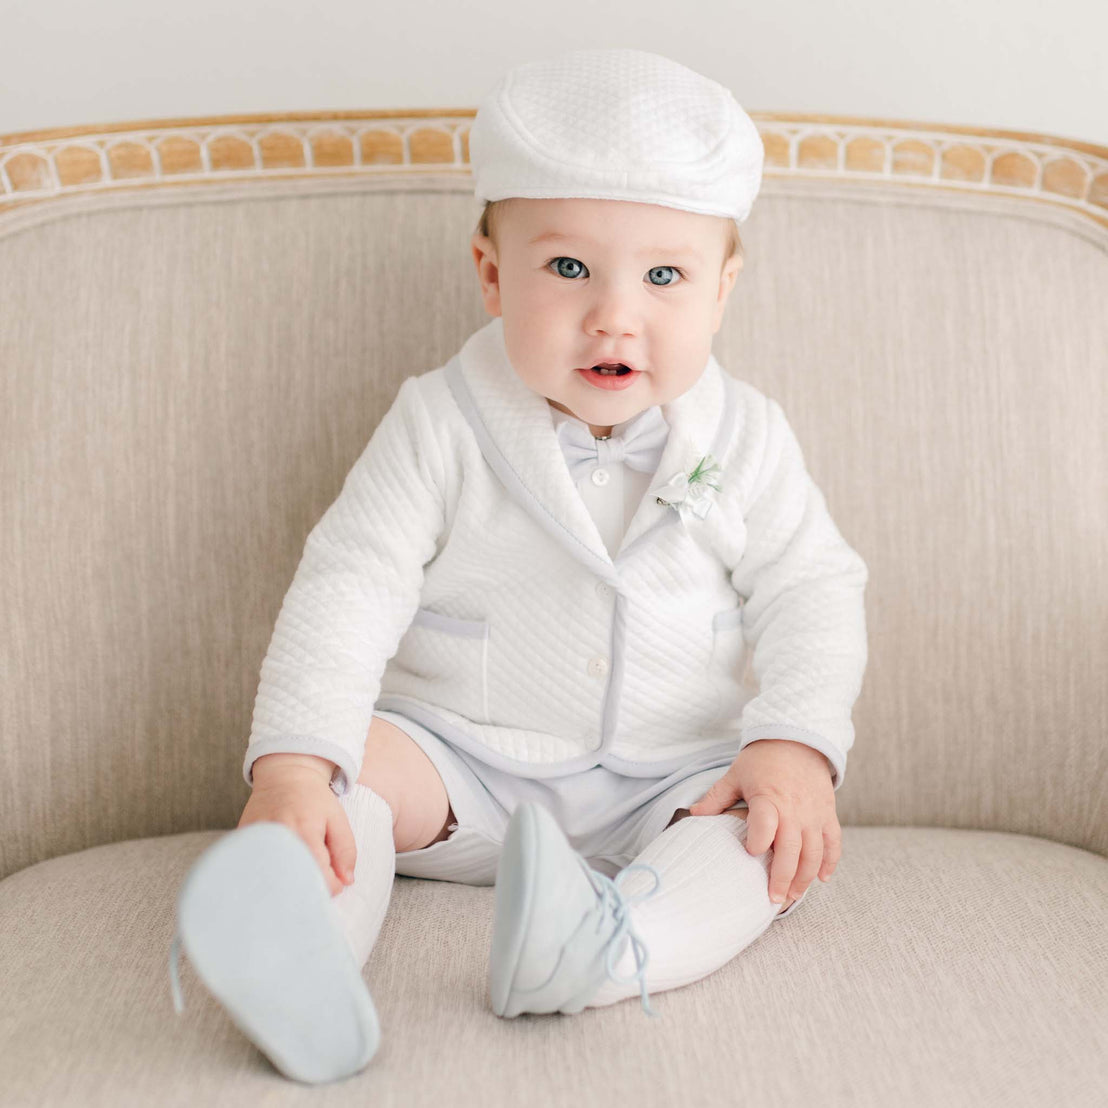 Baby boy sitting on a chair wearing the Harrison 3-Piece Shorts Suit made with plush white quilted cotton jacket, hat, and light blue shorts